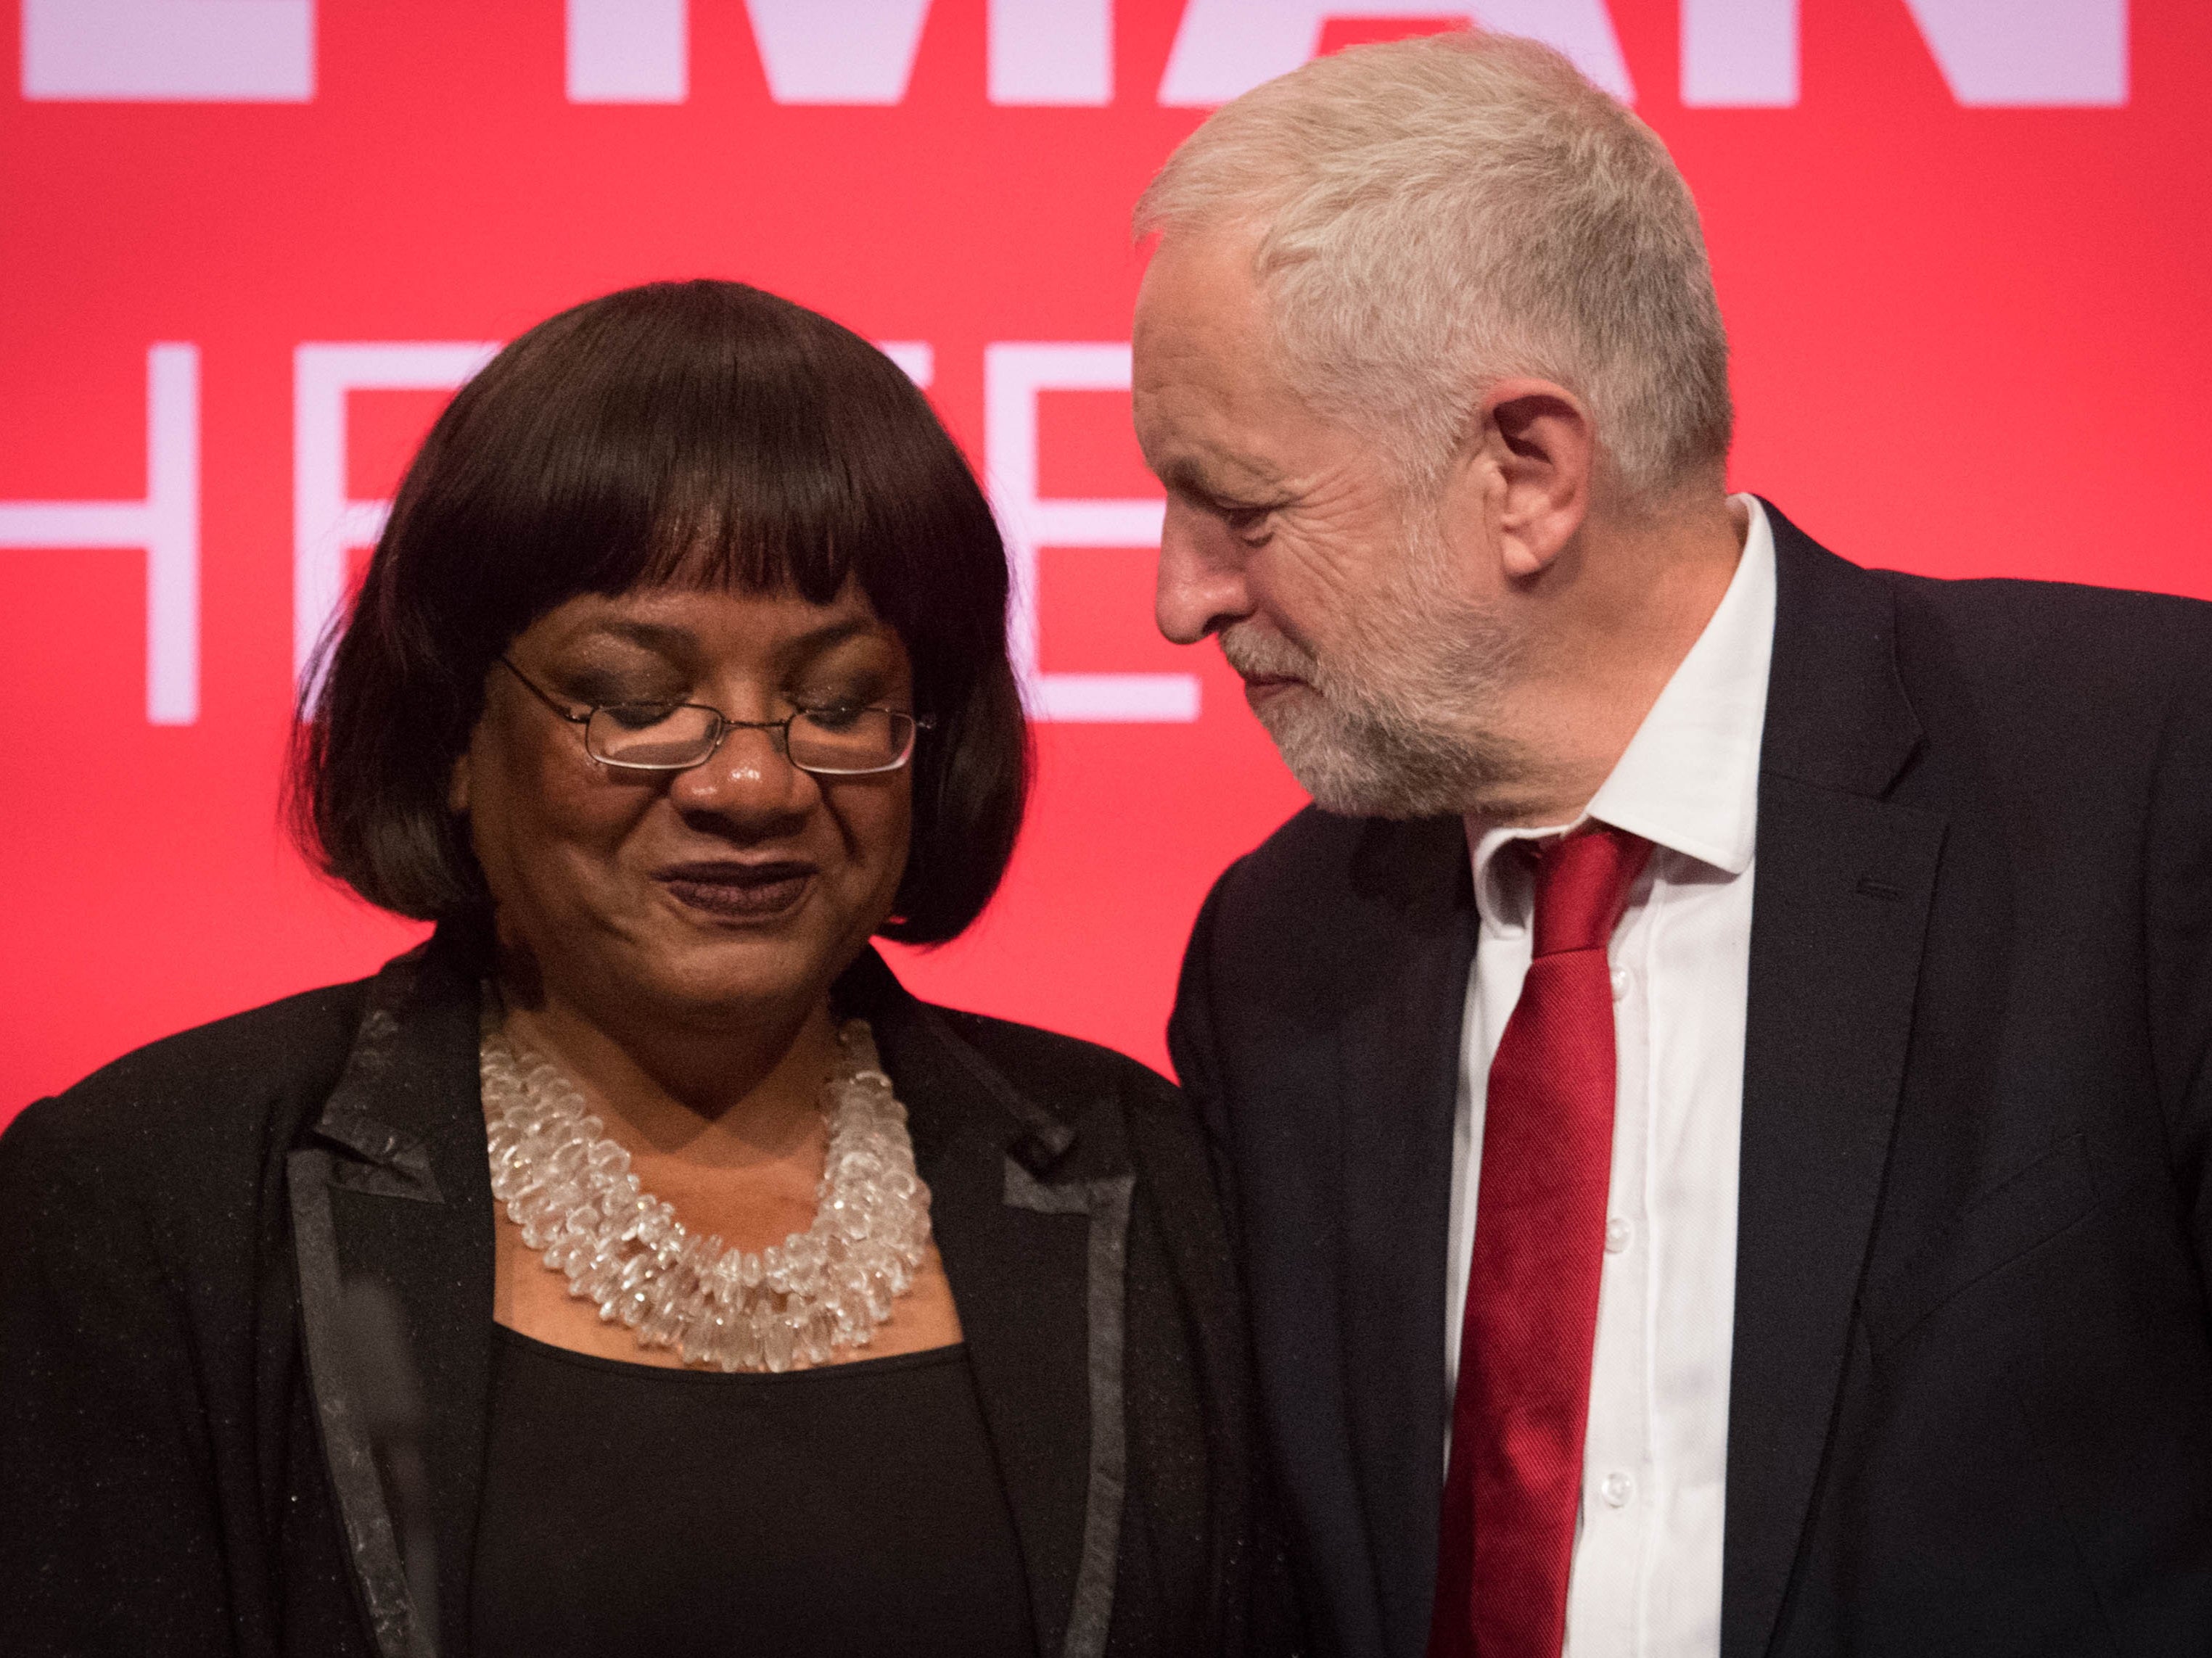 Labour has not yet repaired itself after the problems caused by Mr Corbyn and Ms Abbott during their period of ascendancy in the party